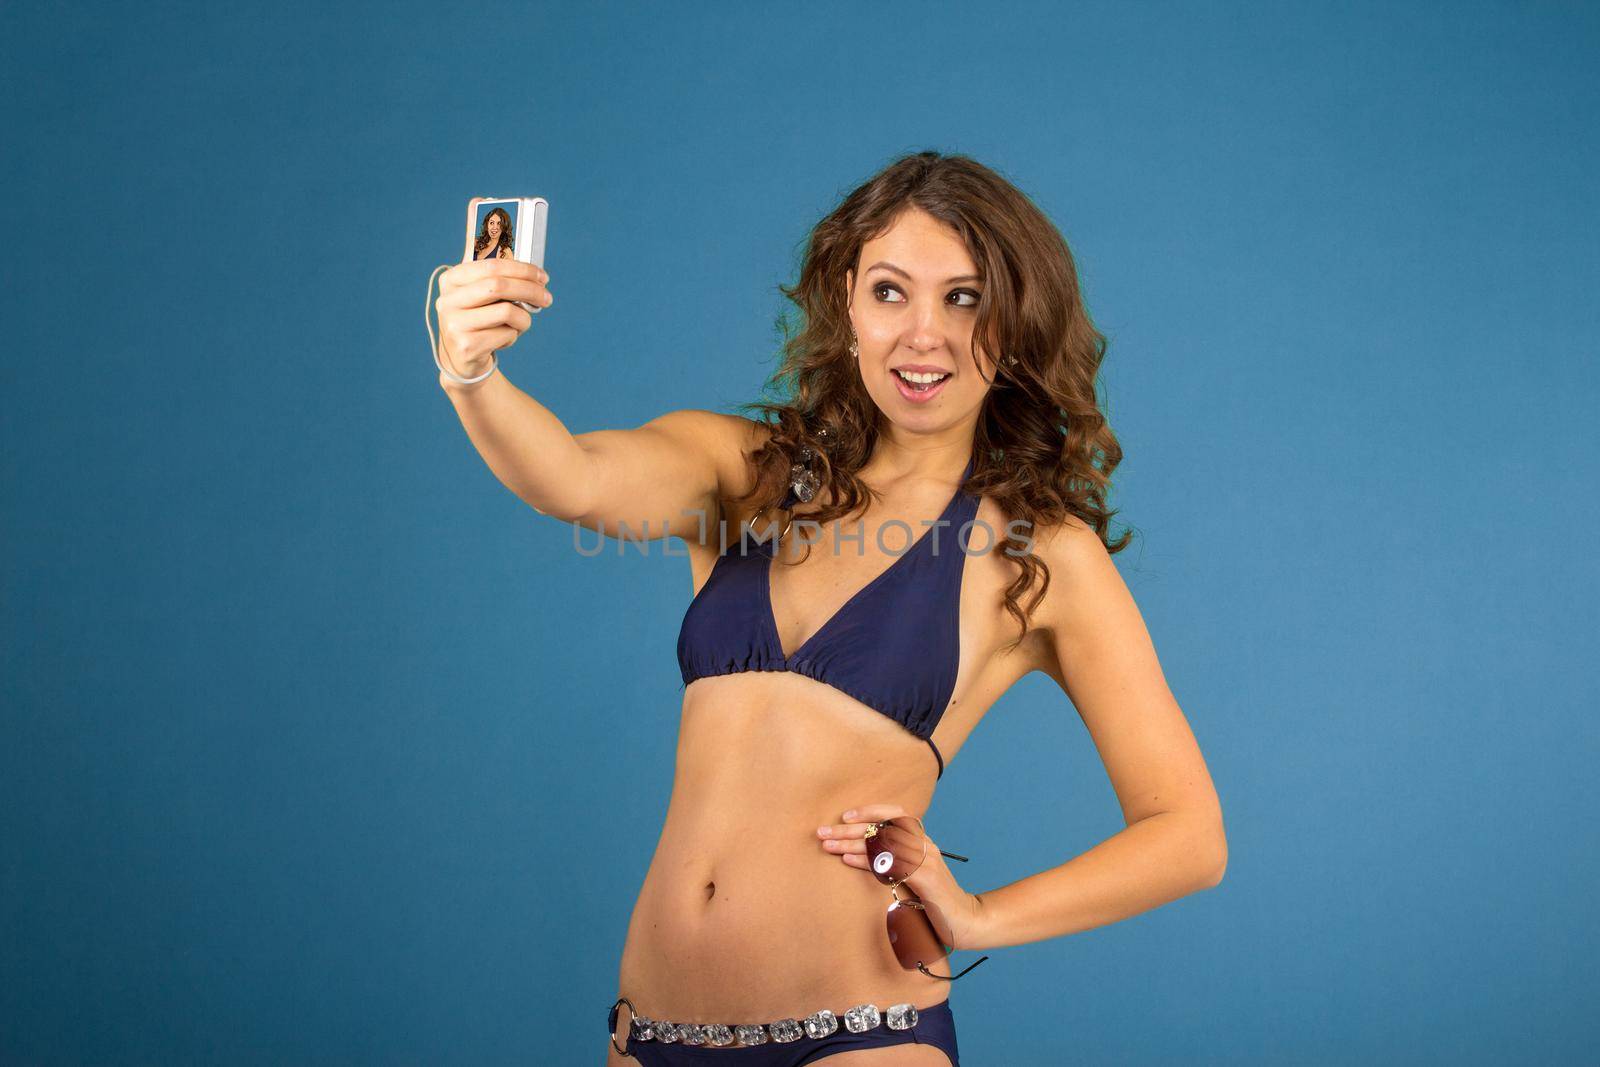 Portrait of smiling woman with camera and while standing against blue isolated background.